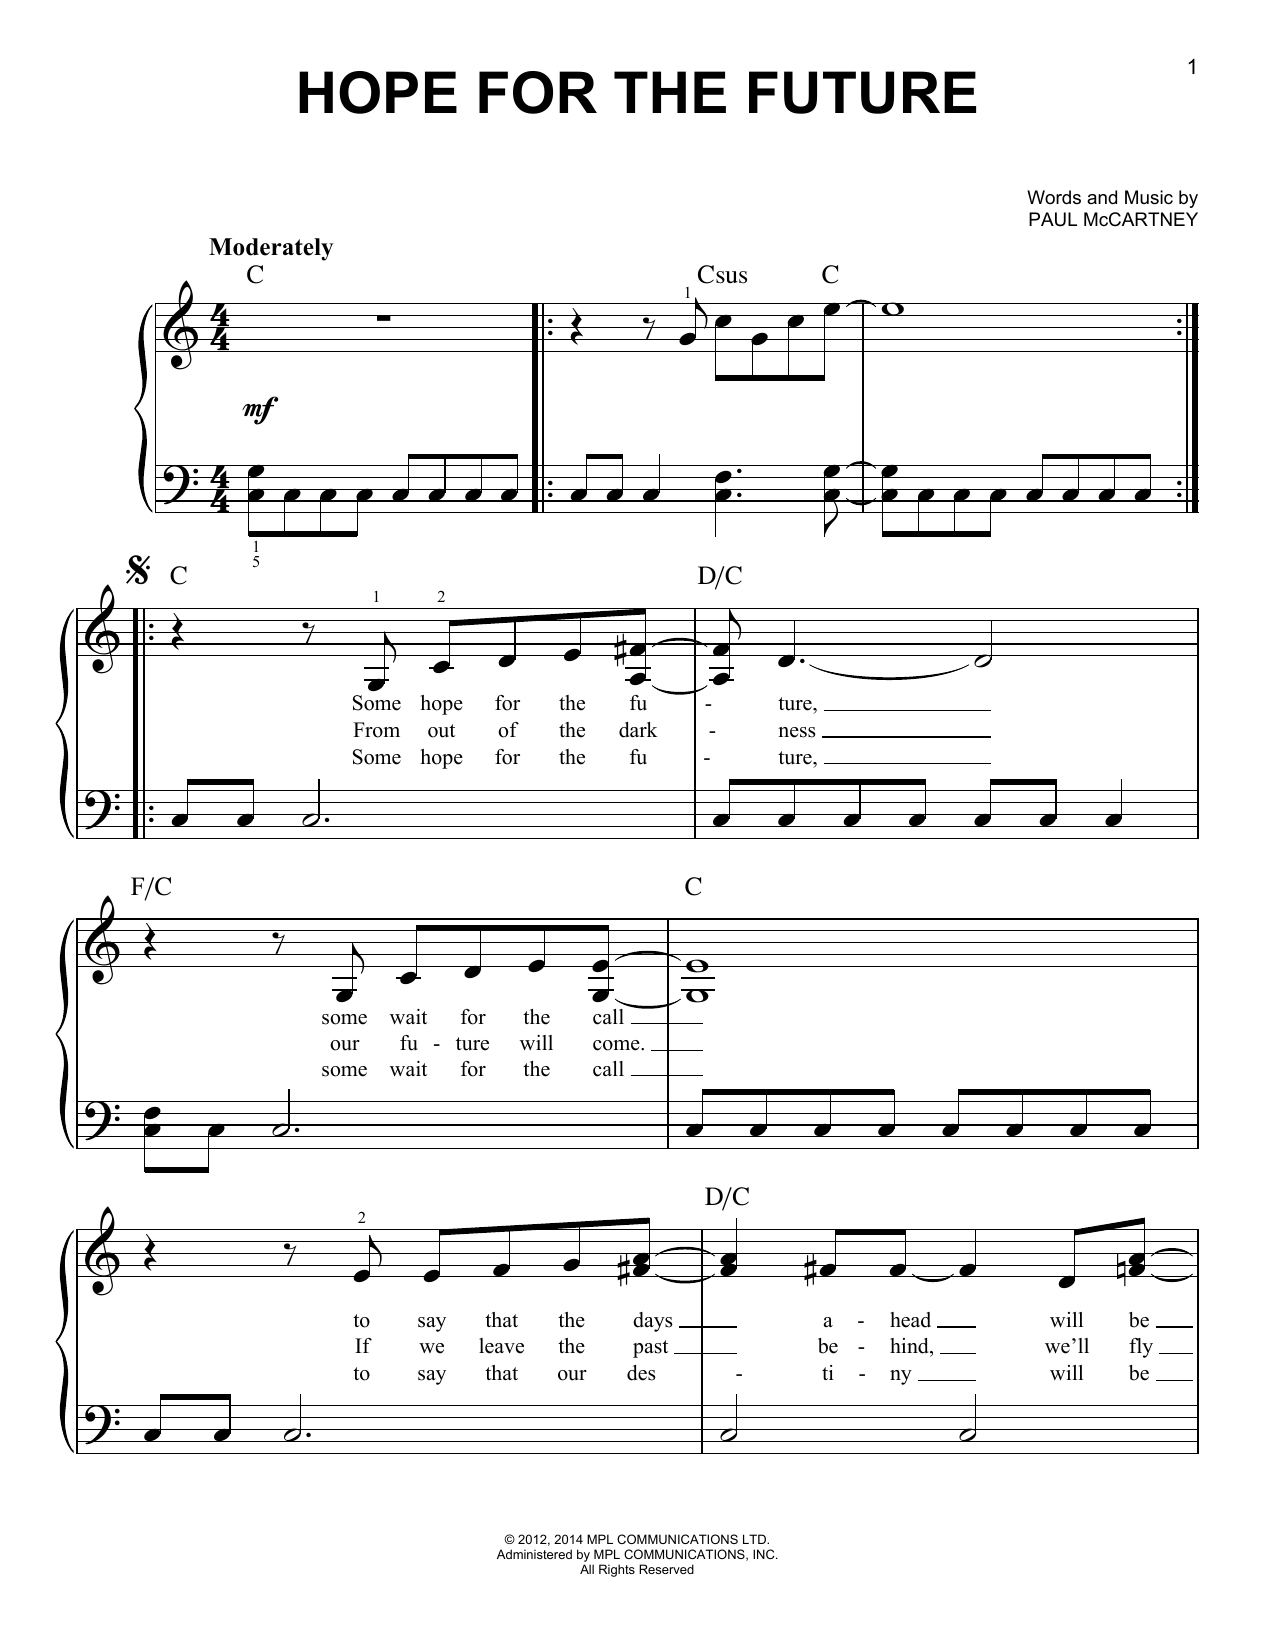 Download Paul McCartney Hope For The Future Sheet Music